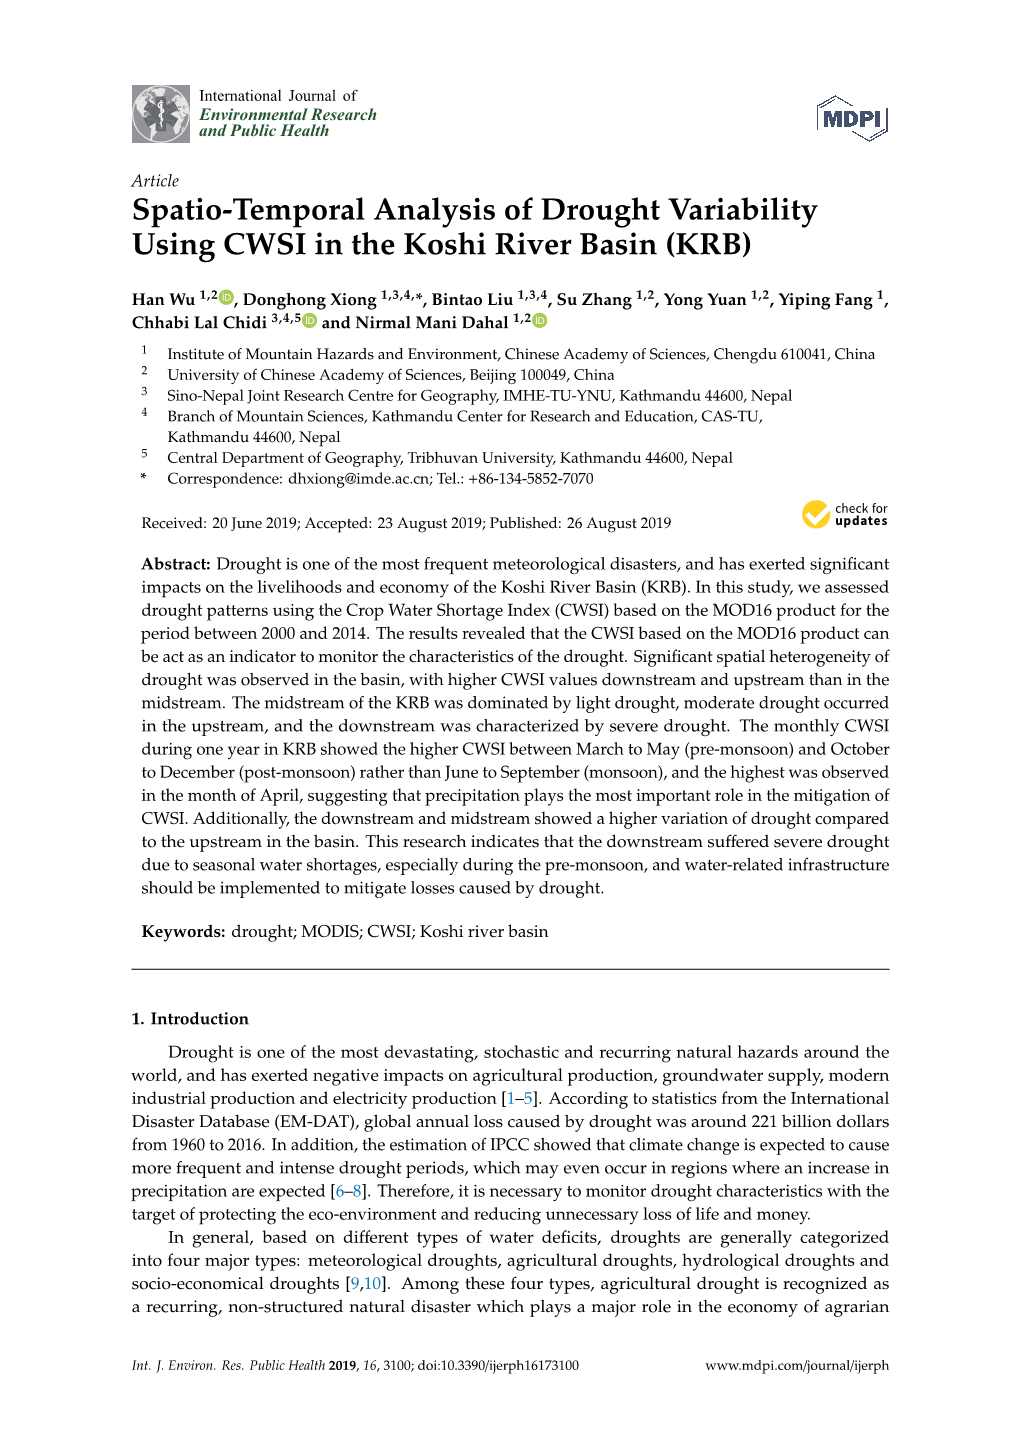 Spatio-Temporal Analysis of Drought Variability Using CWSI in the Koshi River Basin (KRB)